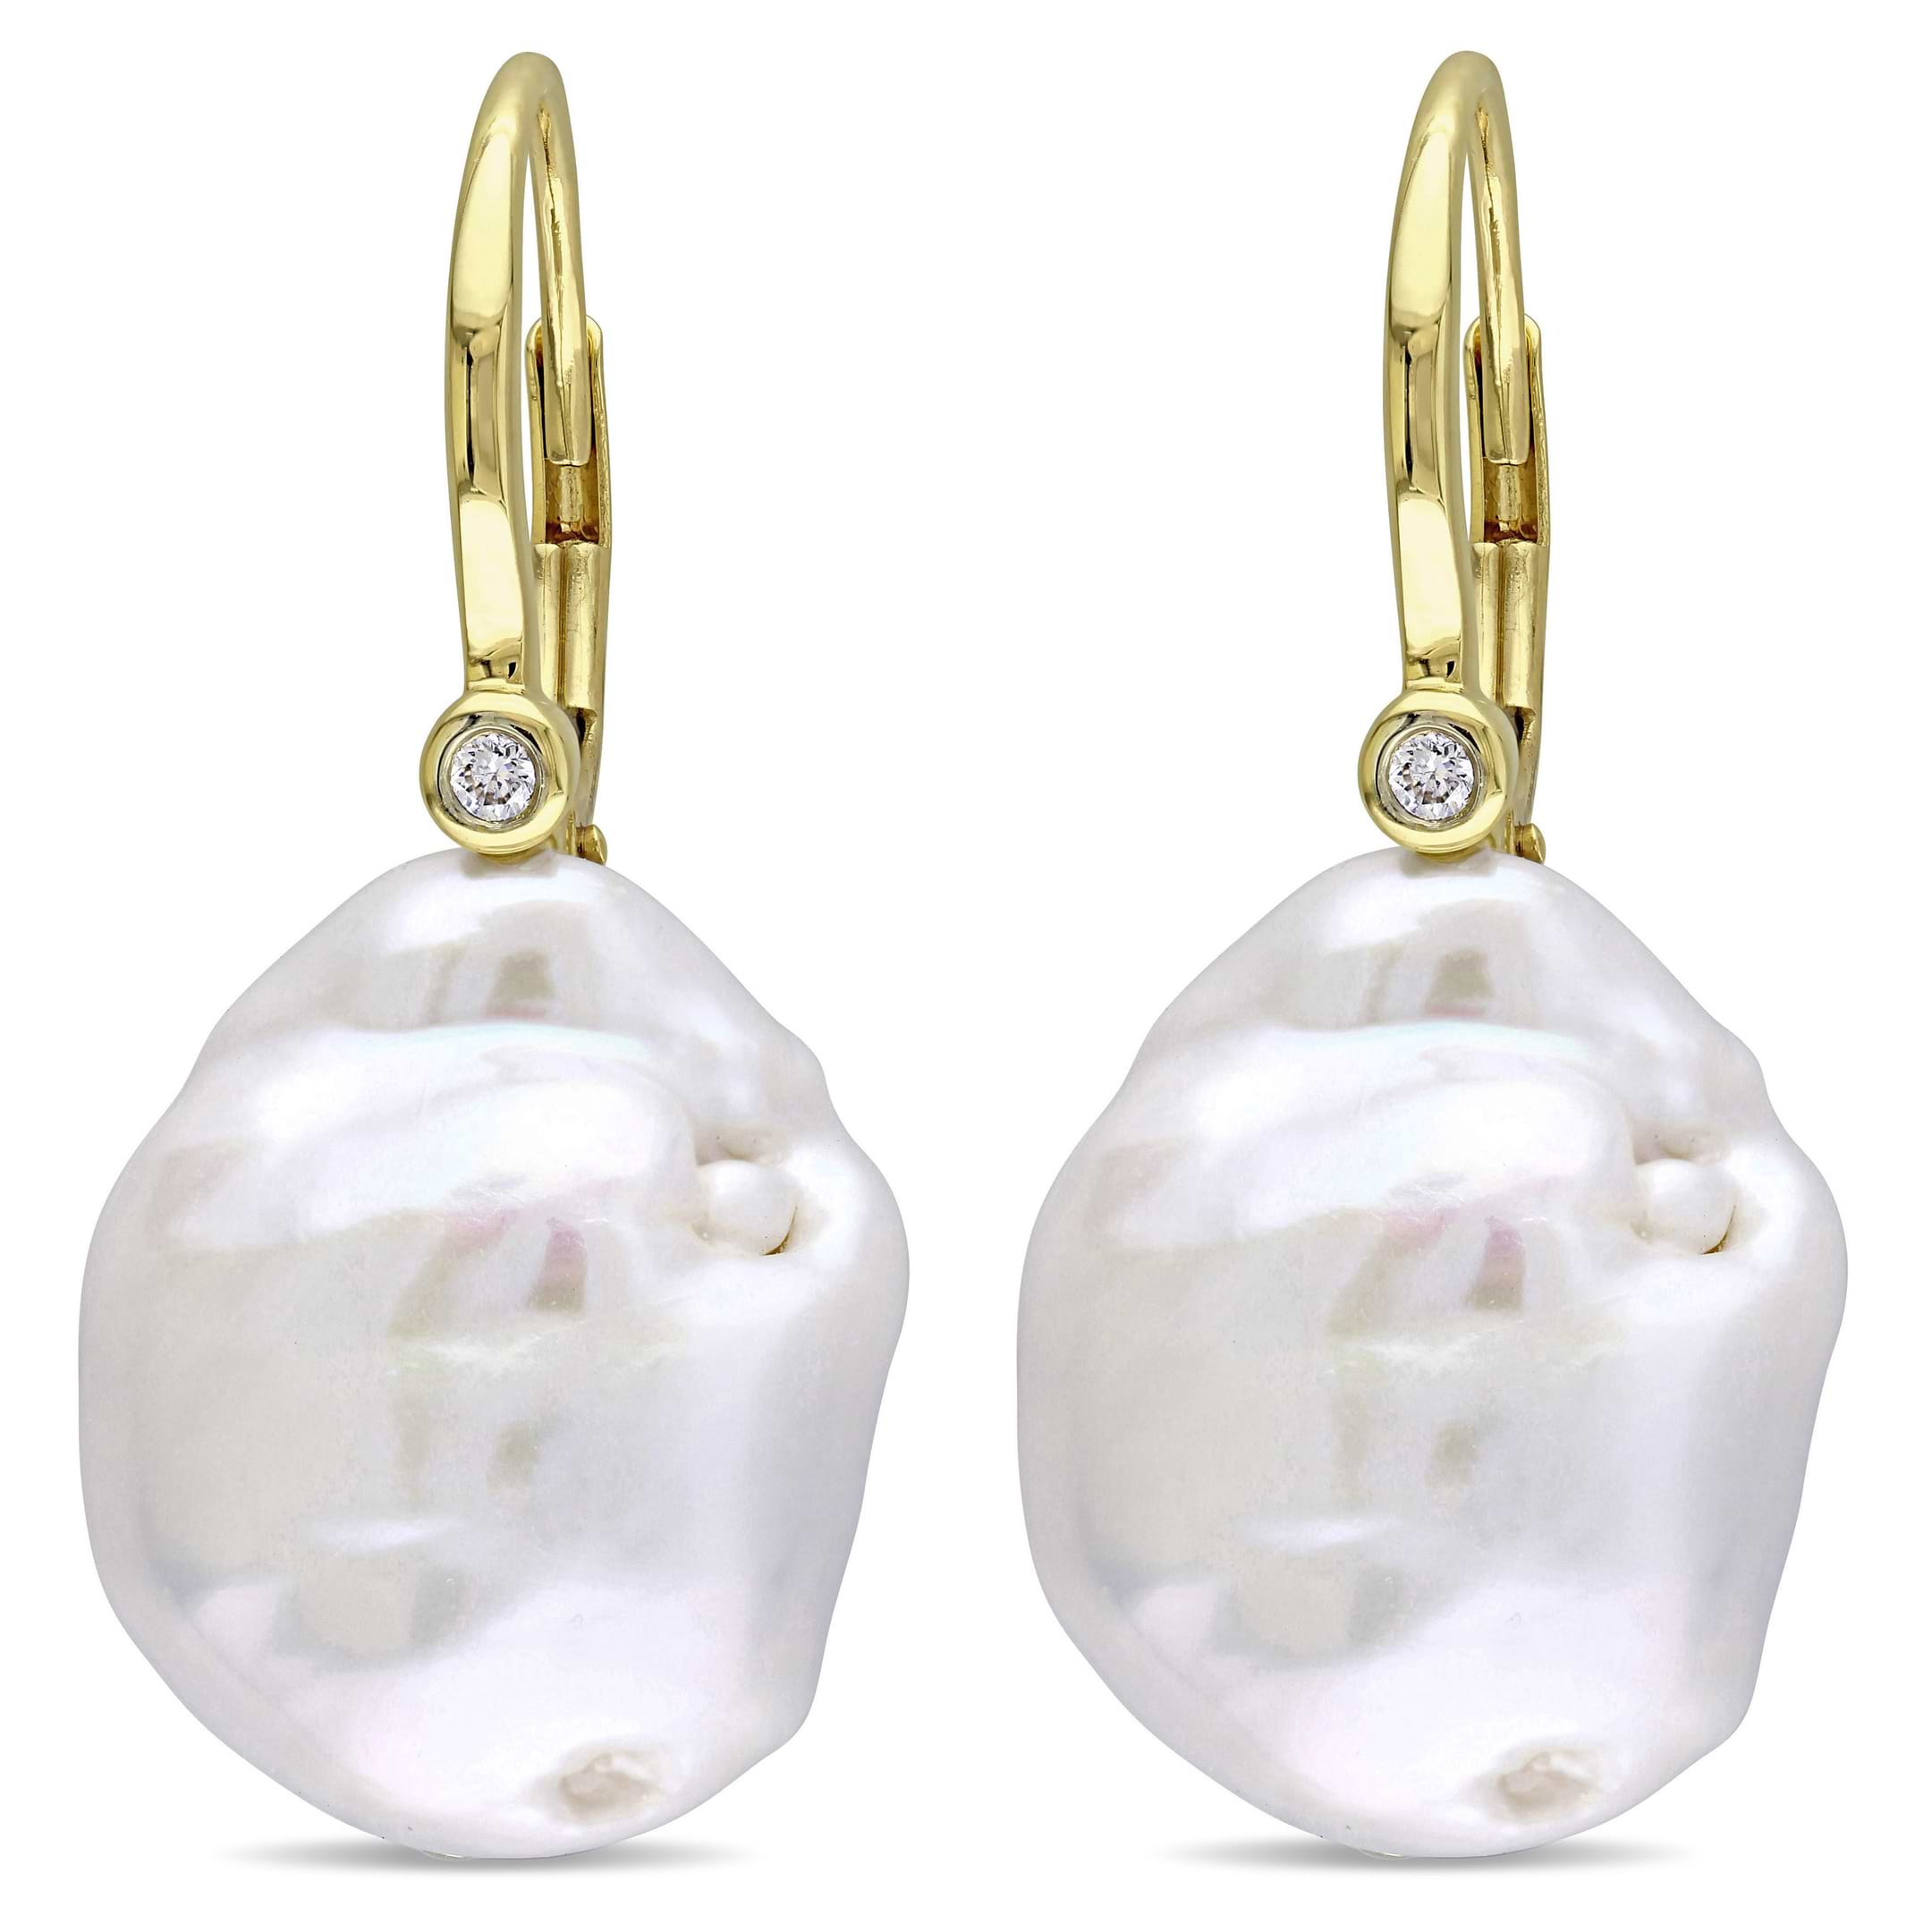 Baroque Pearl & Diamond Accent Earrings 14k Yellow Gold (0.06ct)